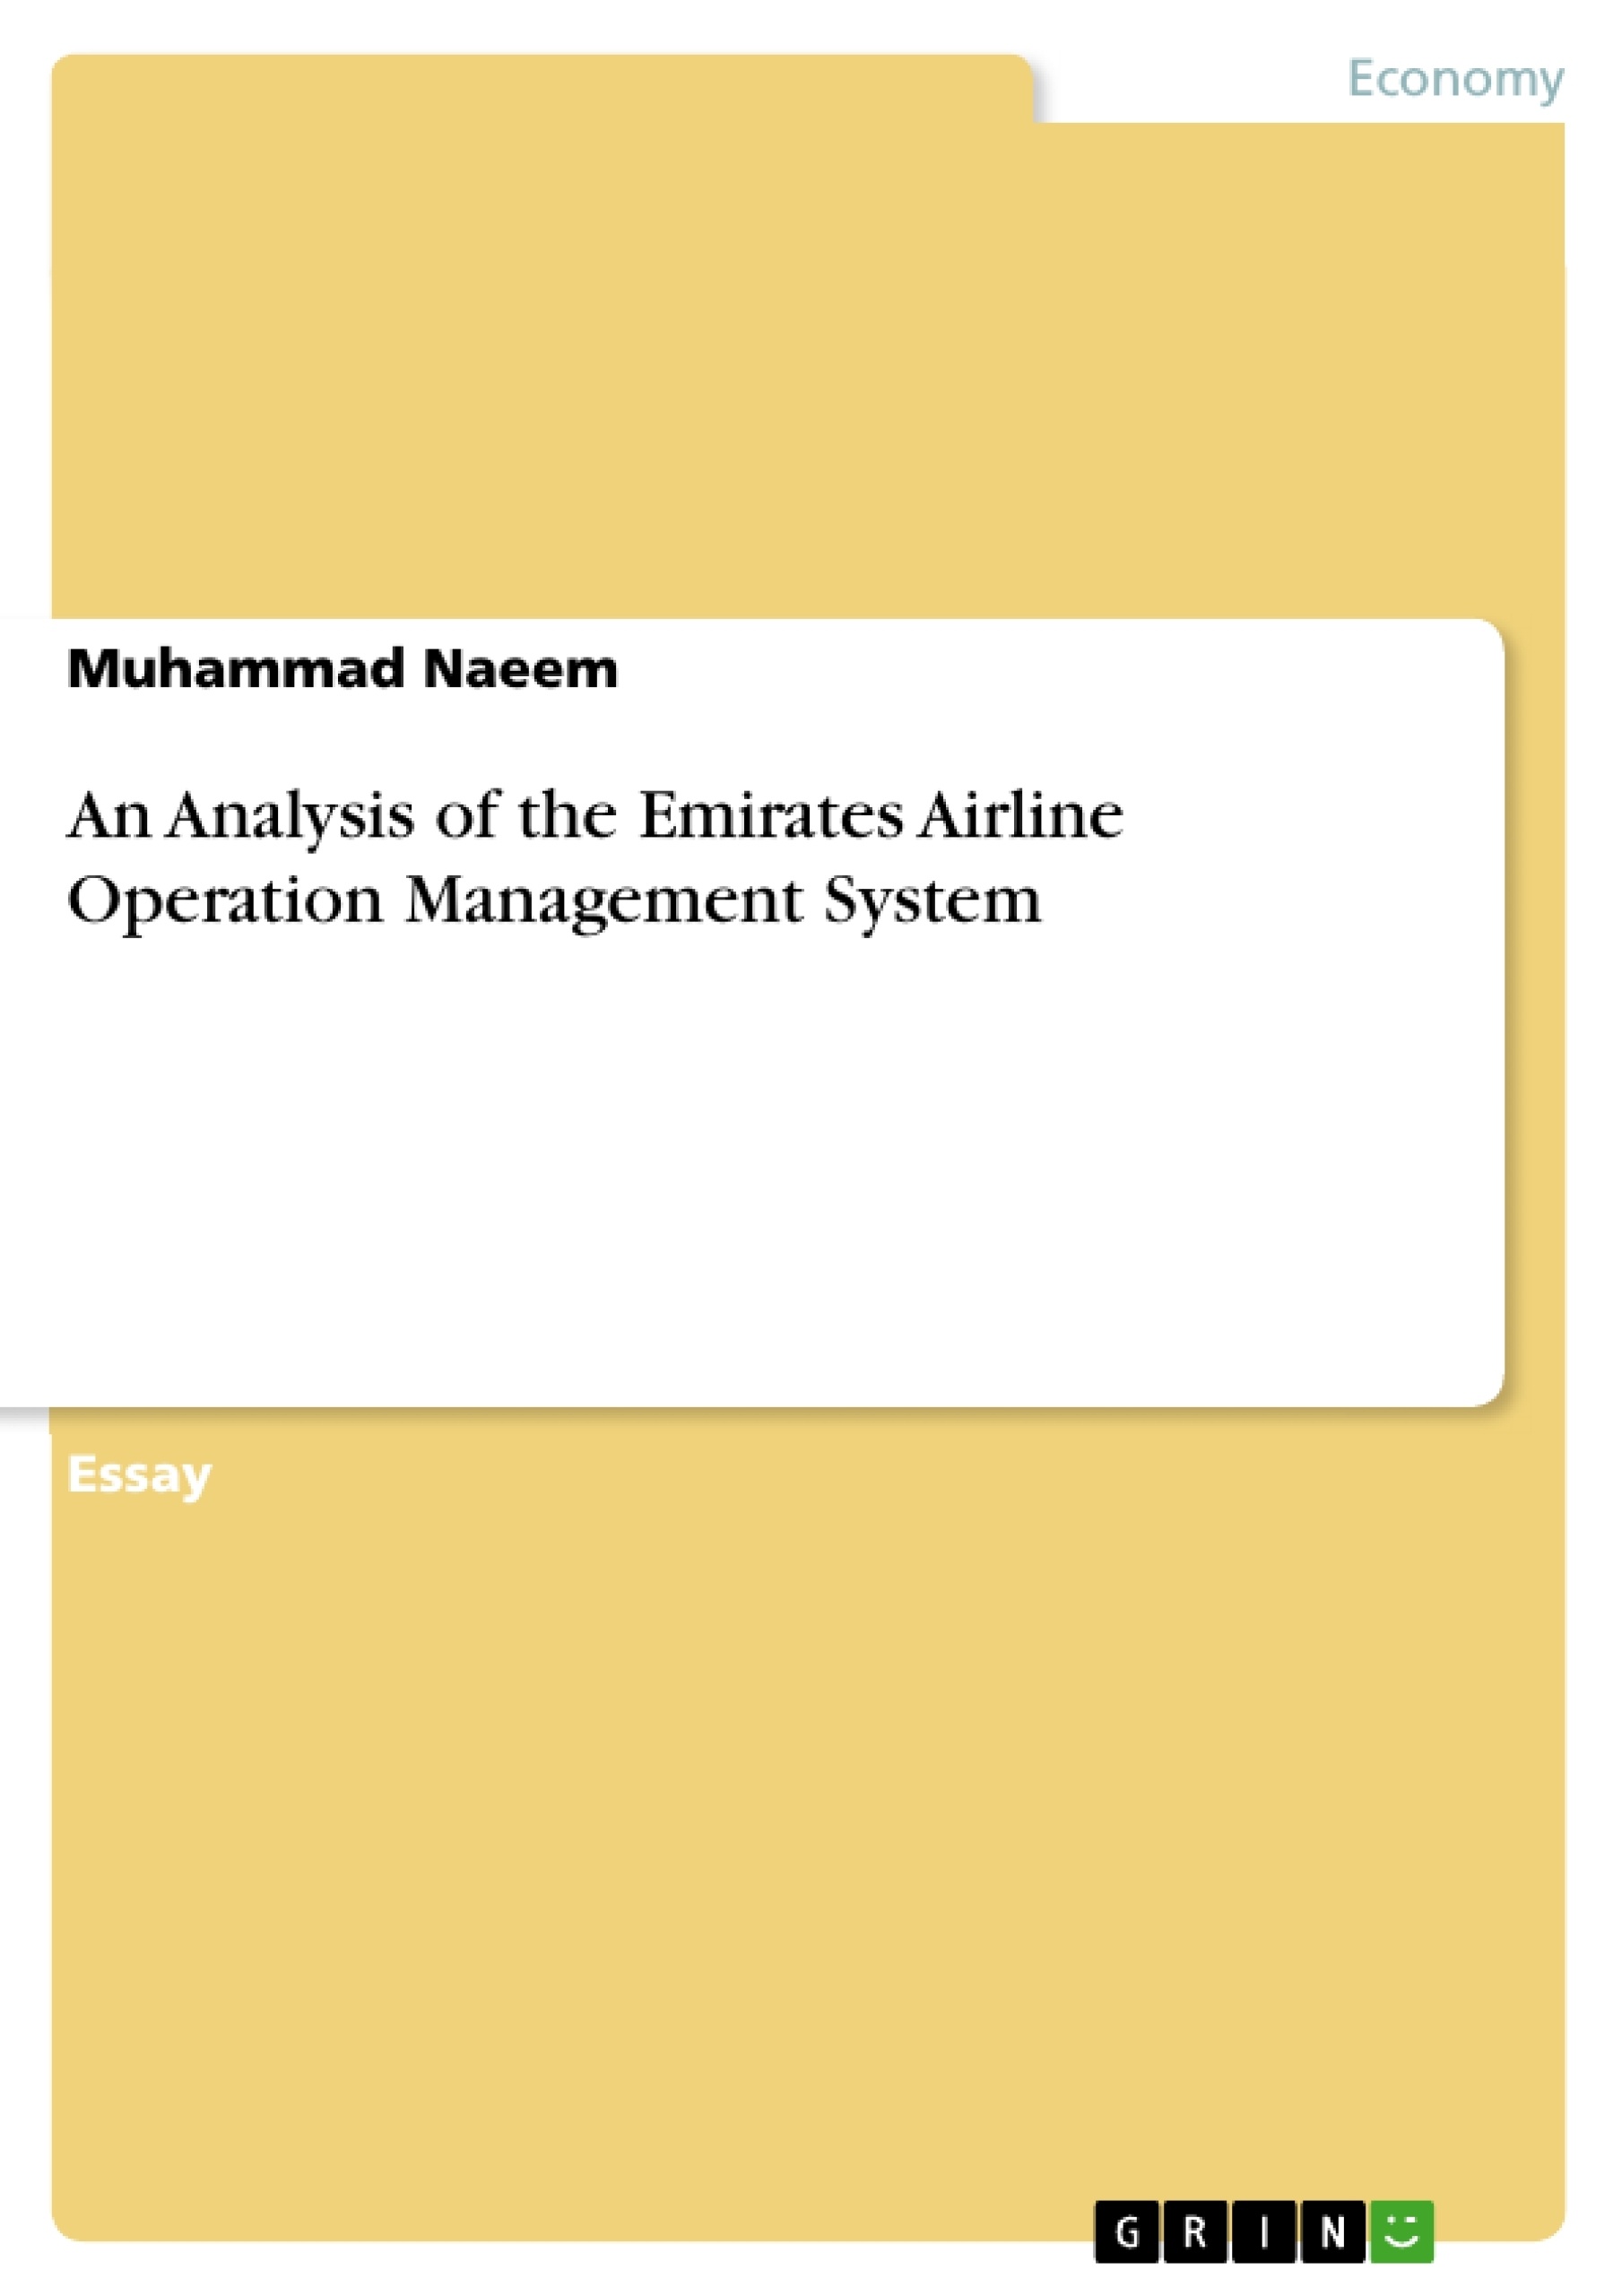 Title: An Analysis of the Emirates Airline Operation Management System